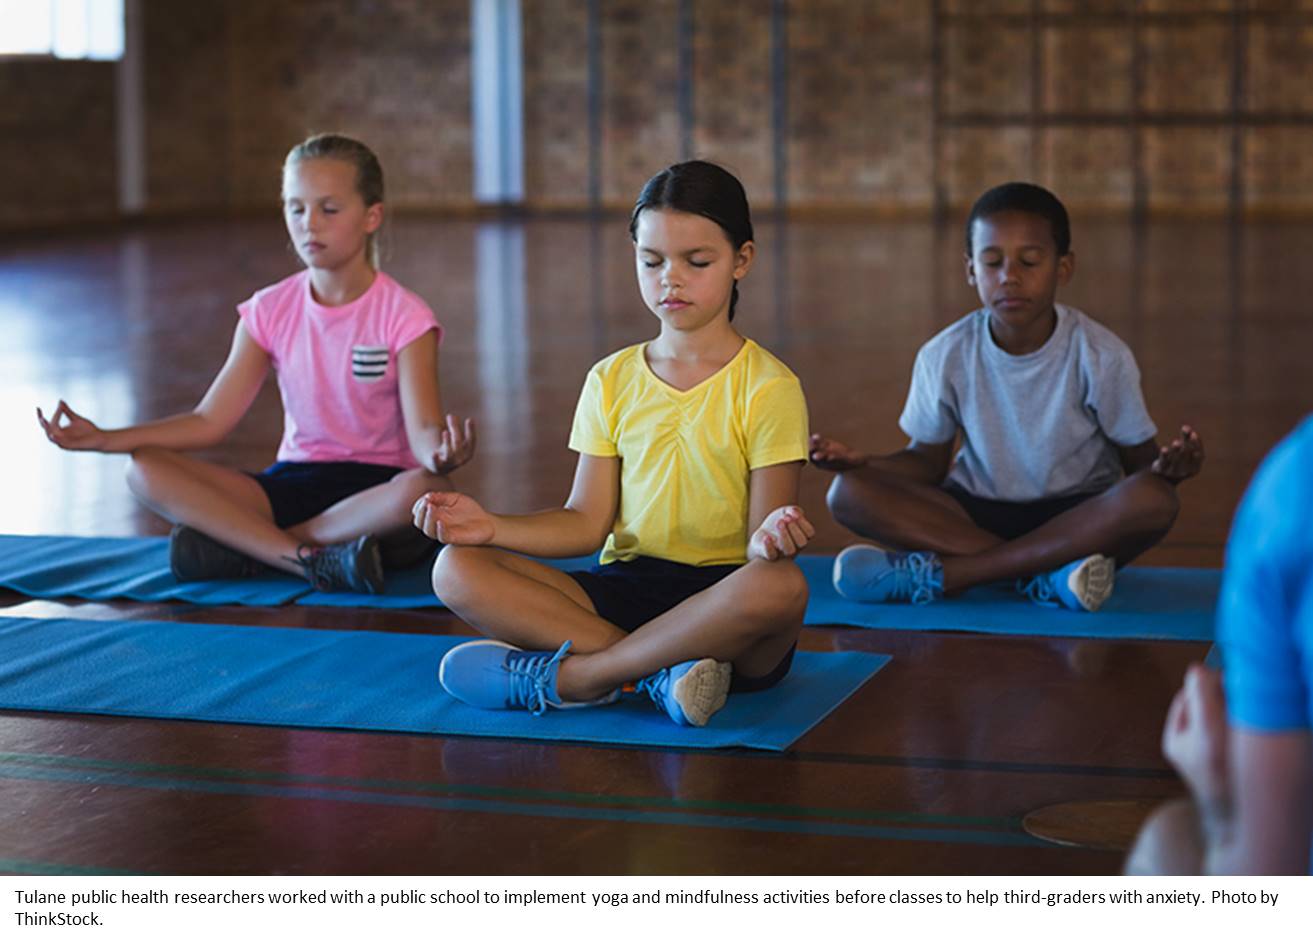 School-based yoga can help children better manage stress and anxiety